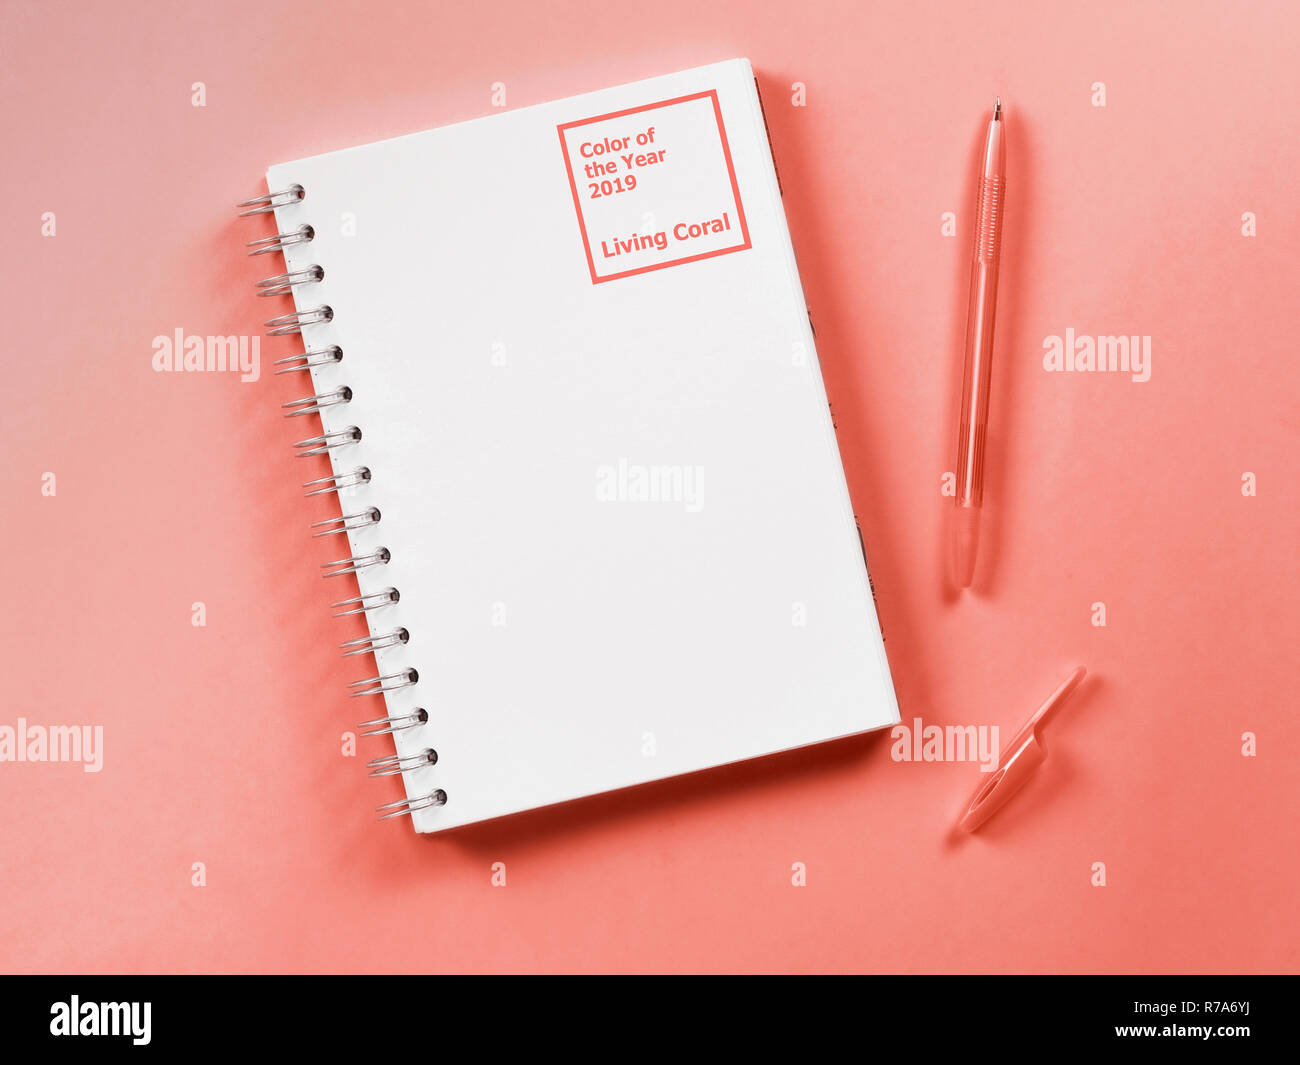 Color of year 2019 Living Coral concept. Blank note paper with pen on pliving coral color background. Top view or flat lay. Copy space for text. Vertical. Stock Photo